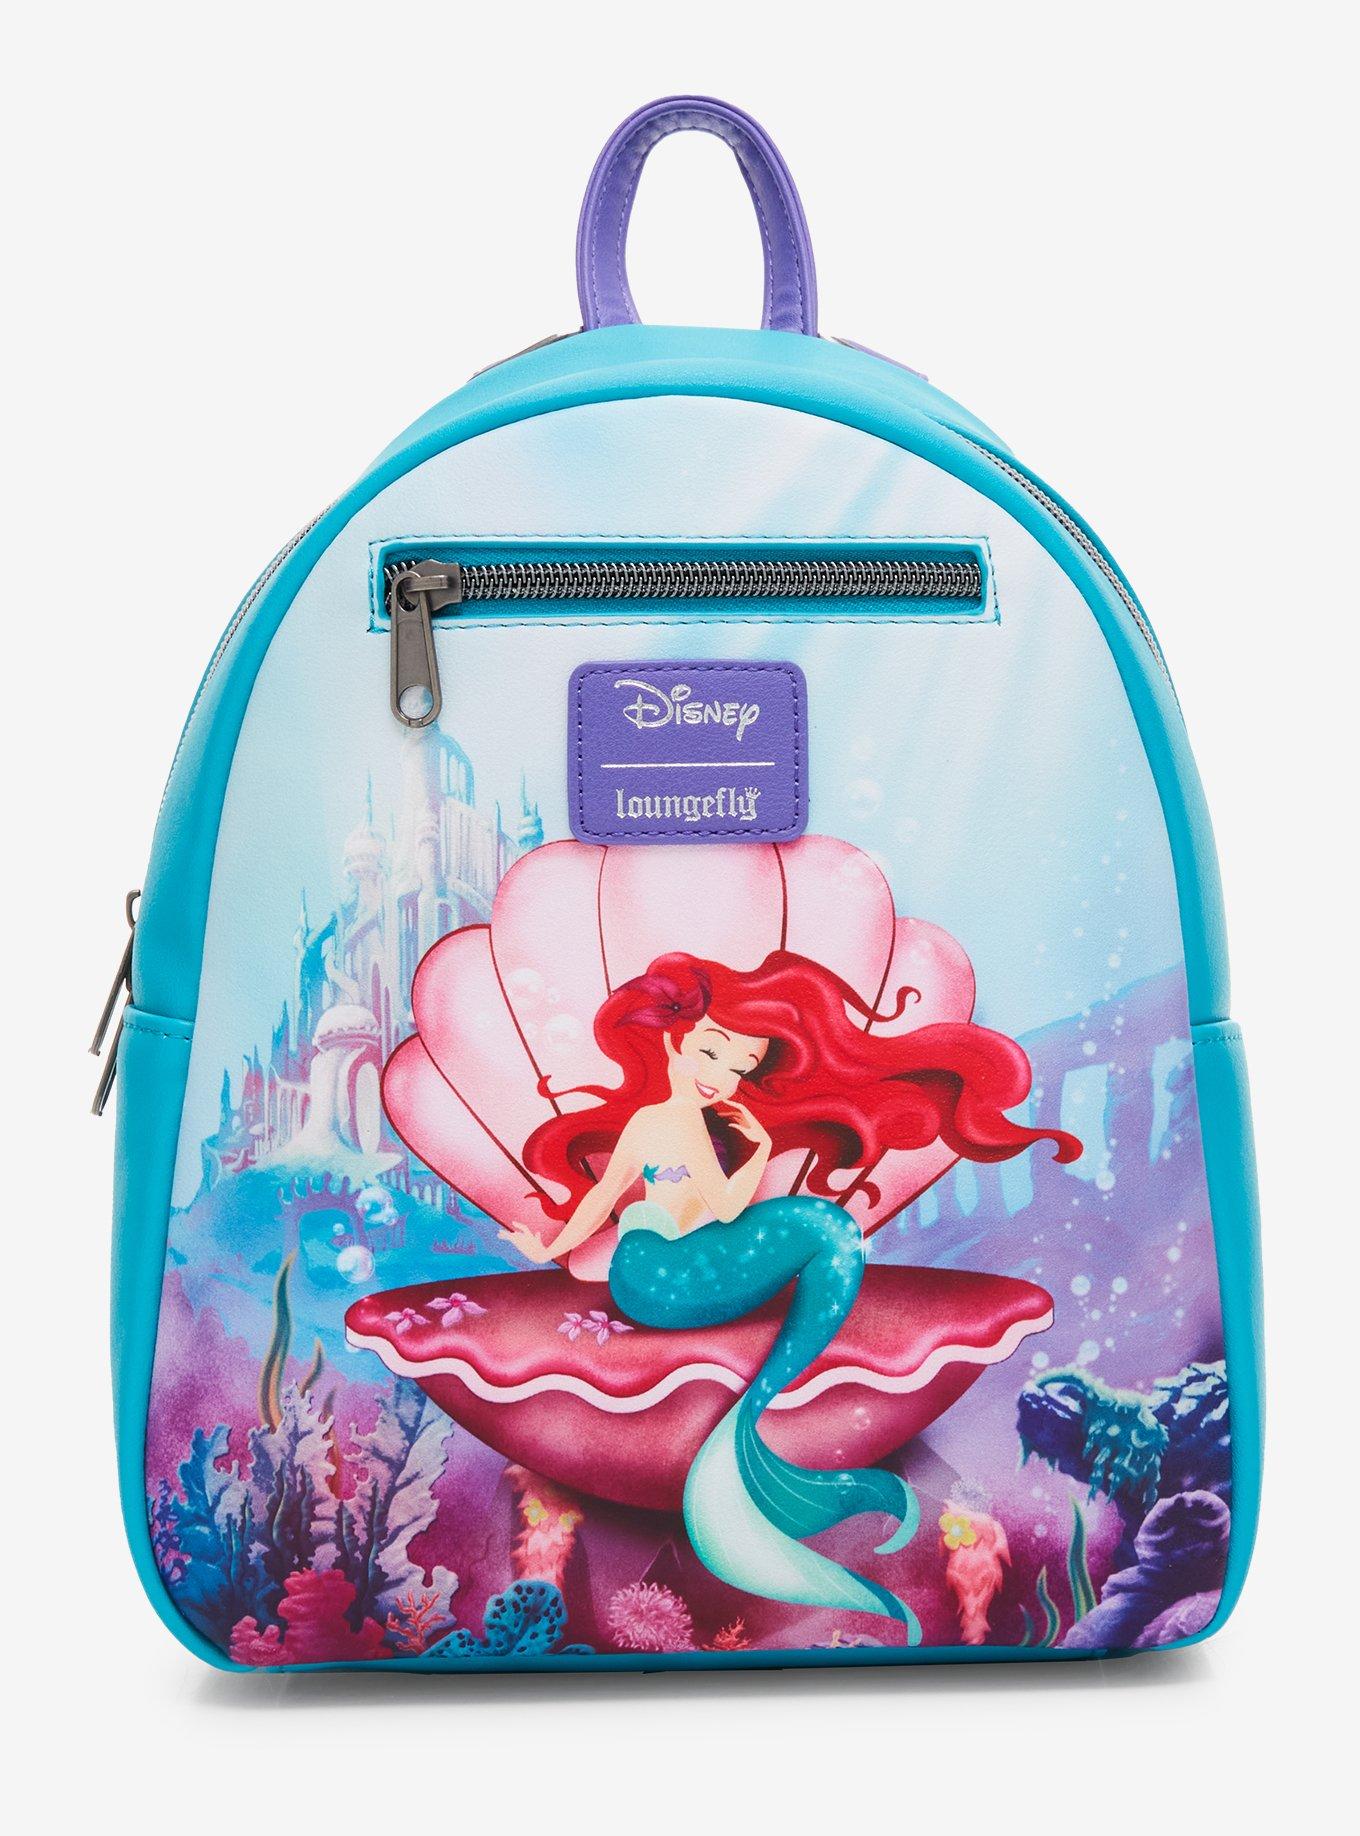 Coming Soon: Exclusive Loungefly Disney The Little Mermaid Ariel